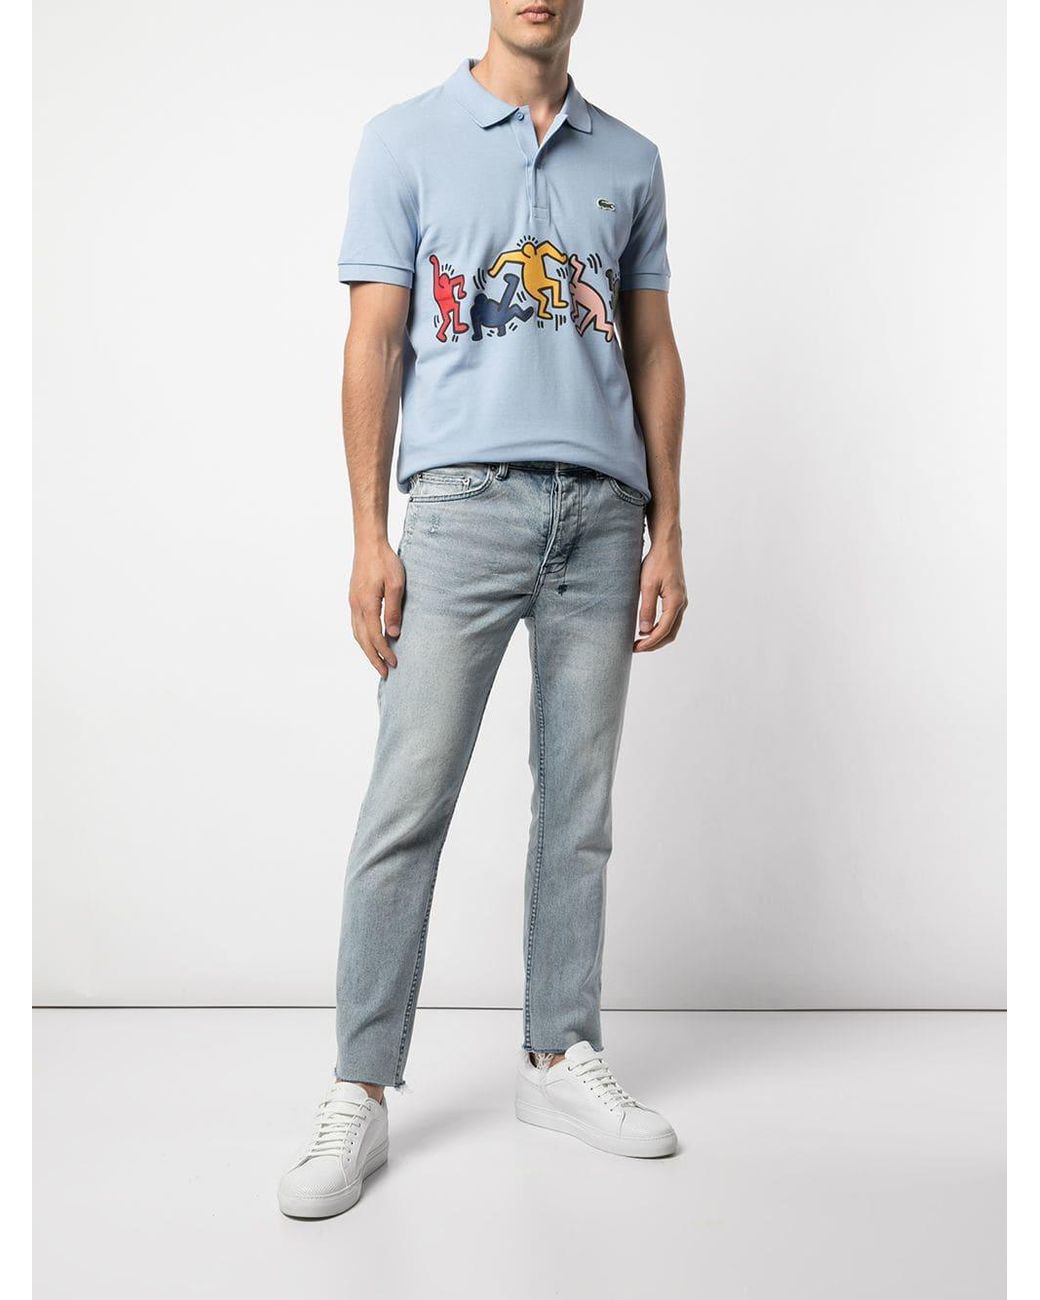 Lacoste X Keith Haring Polo Shirt in Blue for Men | Lyst Canada